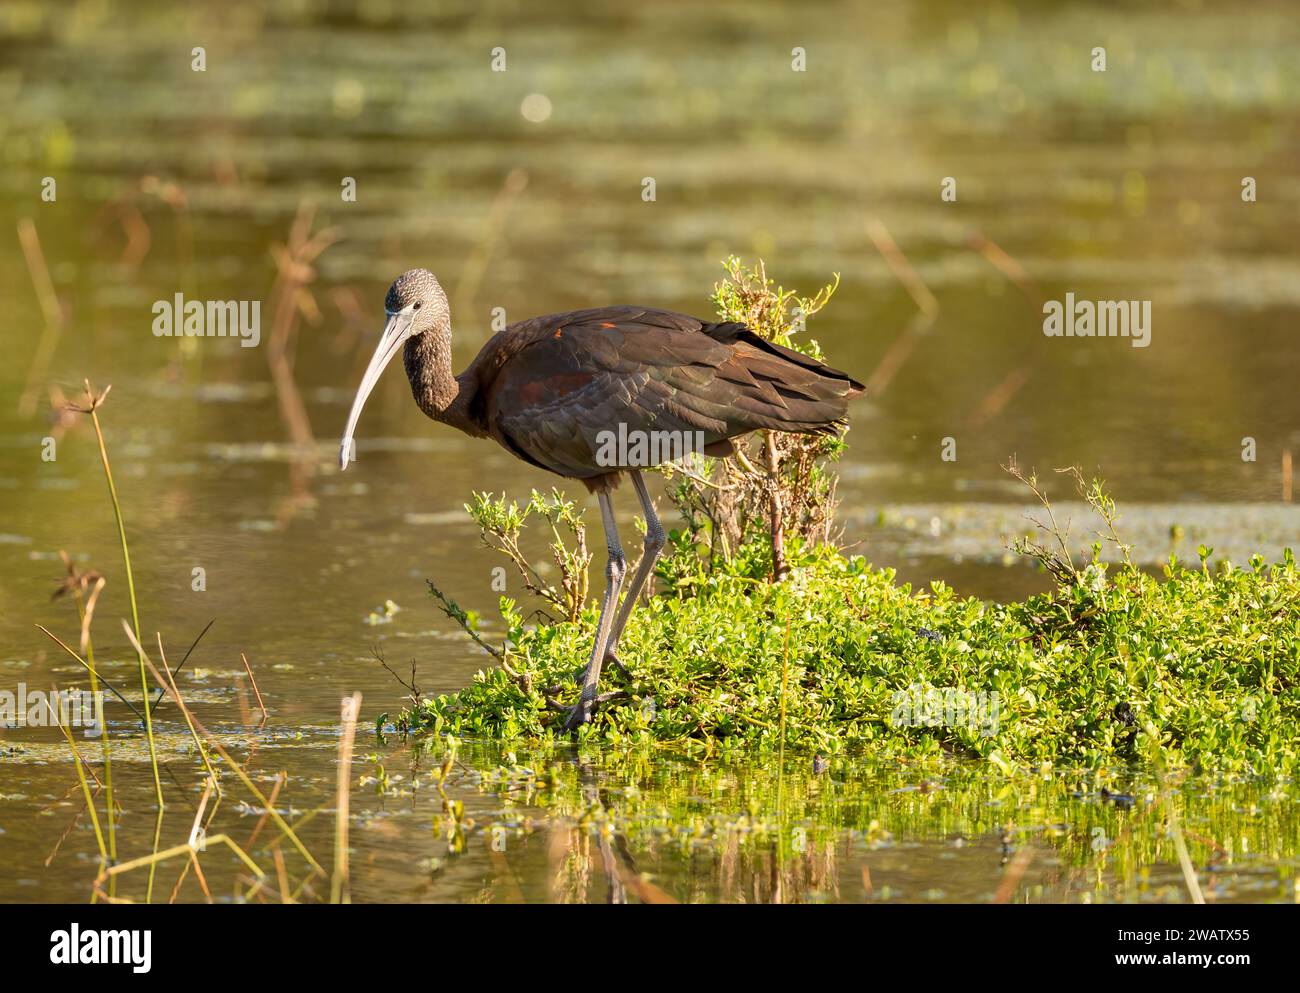 The glossy ibis (Plegadis falcinellus) with its metallic iridescent sheen, inhabits swamps, mudflats, and wetlands throughout much of the Australia. Stock Photo